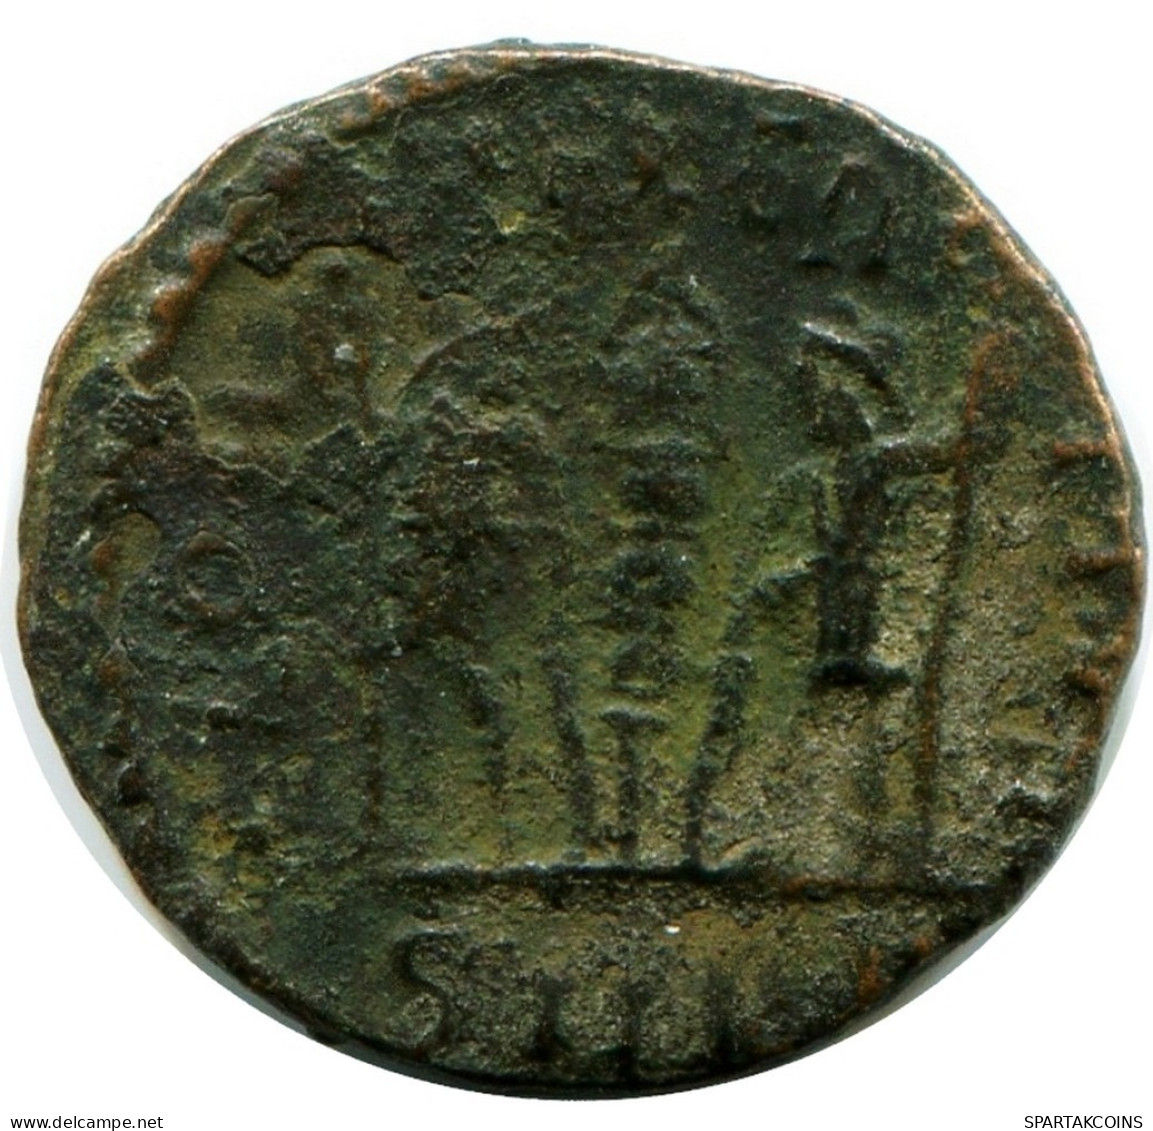 CONSTANS MINTED IN CYZICUS FOUND IN IHNASYAH HOARD EGYPT #ANC11594.14.U.A - El Imperio Christiano (307 / 363)